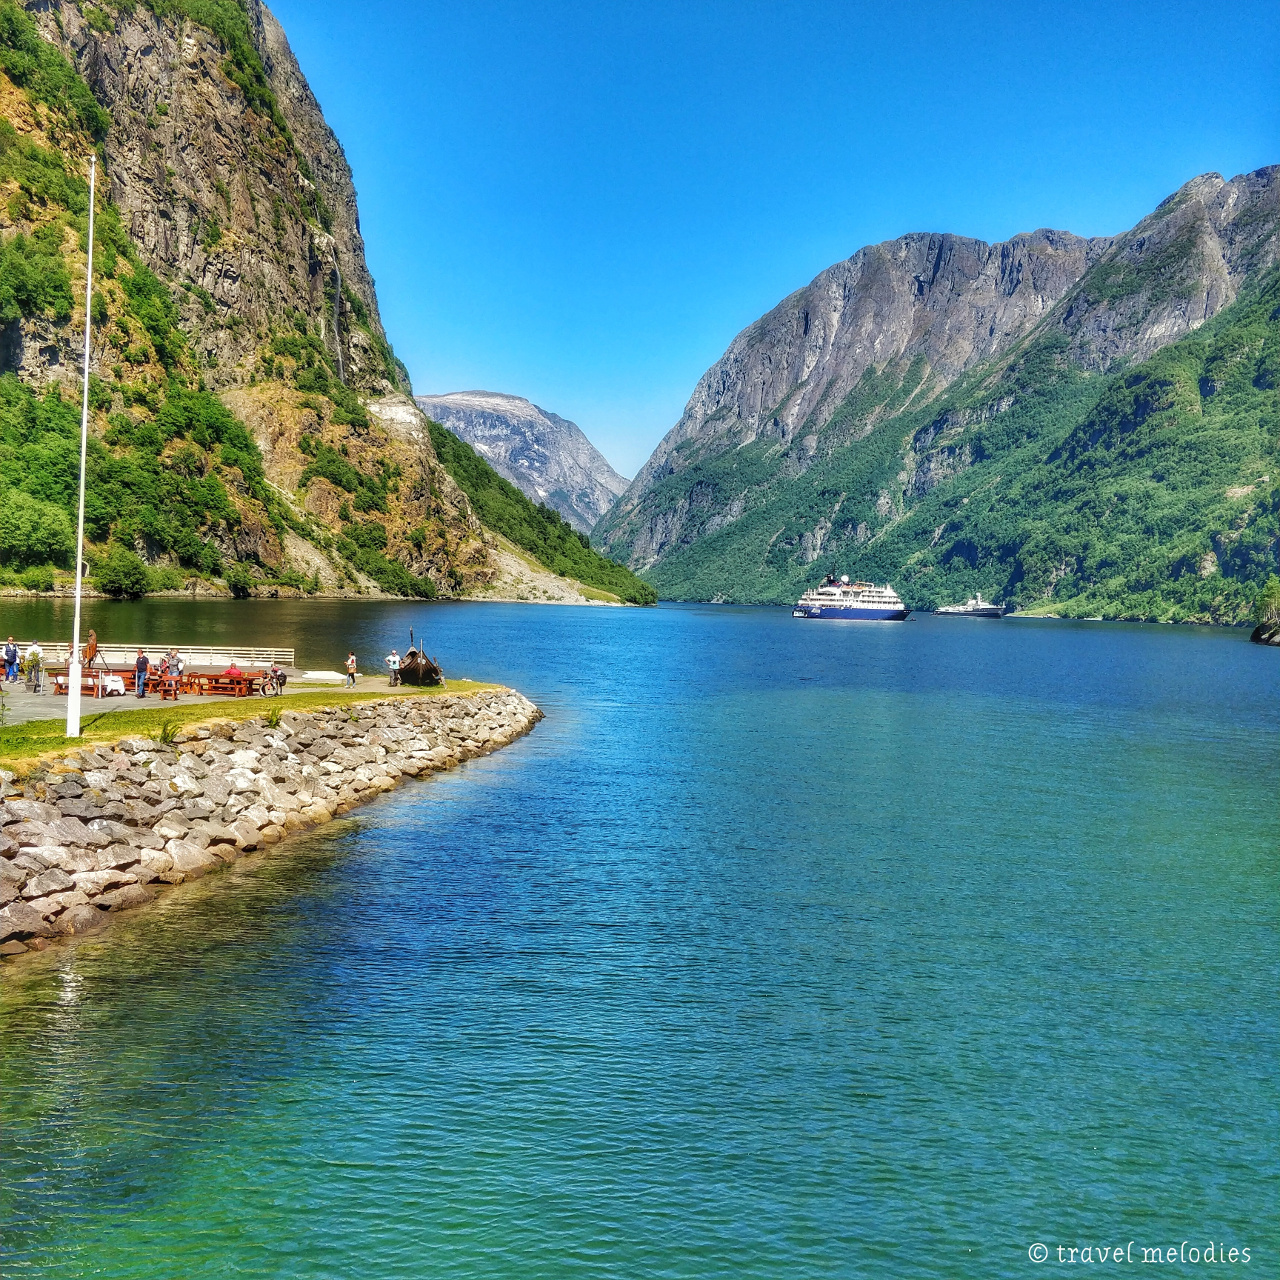 Nærøyfjord – Unesco Protected Fjord, Norway is one of the best UNESCO heritage sites in Europe. Read the article to discover more natural sites in Europe, and a list of world heritage in Europe to add to your bucket list. #UNESCO #unescosites #unescositeseurope #europeunesco #norwayunesco #norway